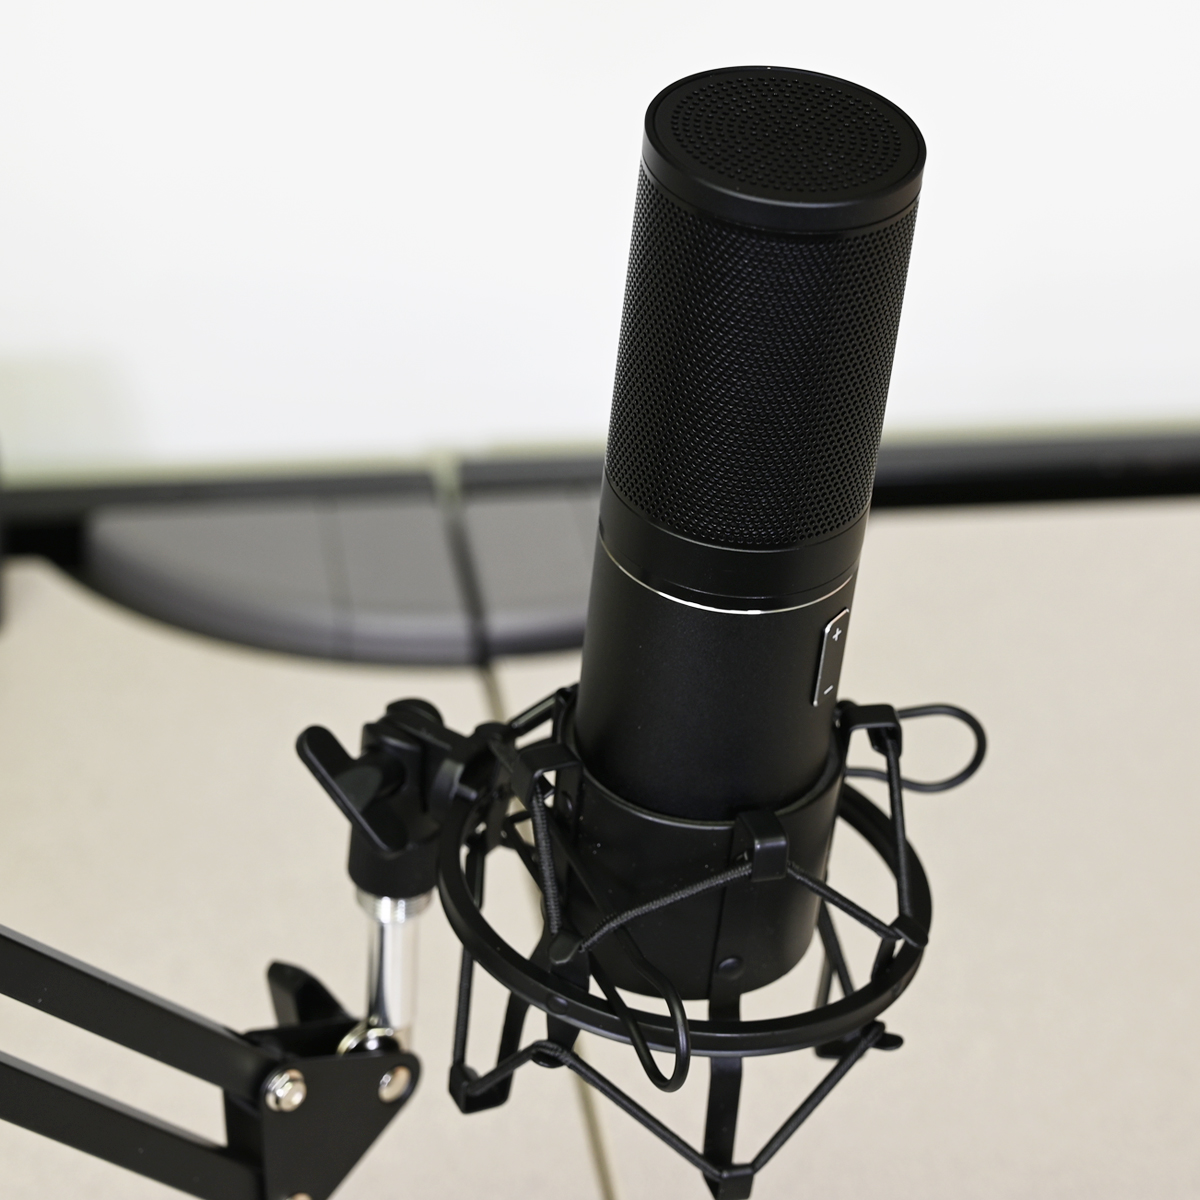 Tonor Q9 Professional Condenser Microphone Kit Review 